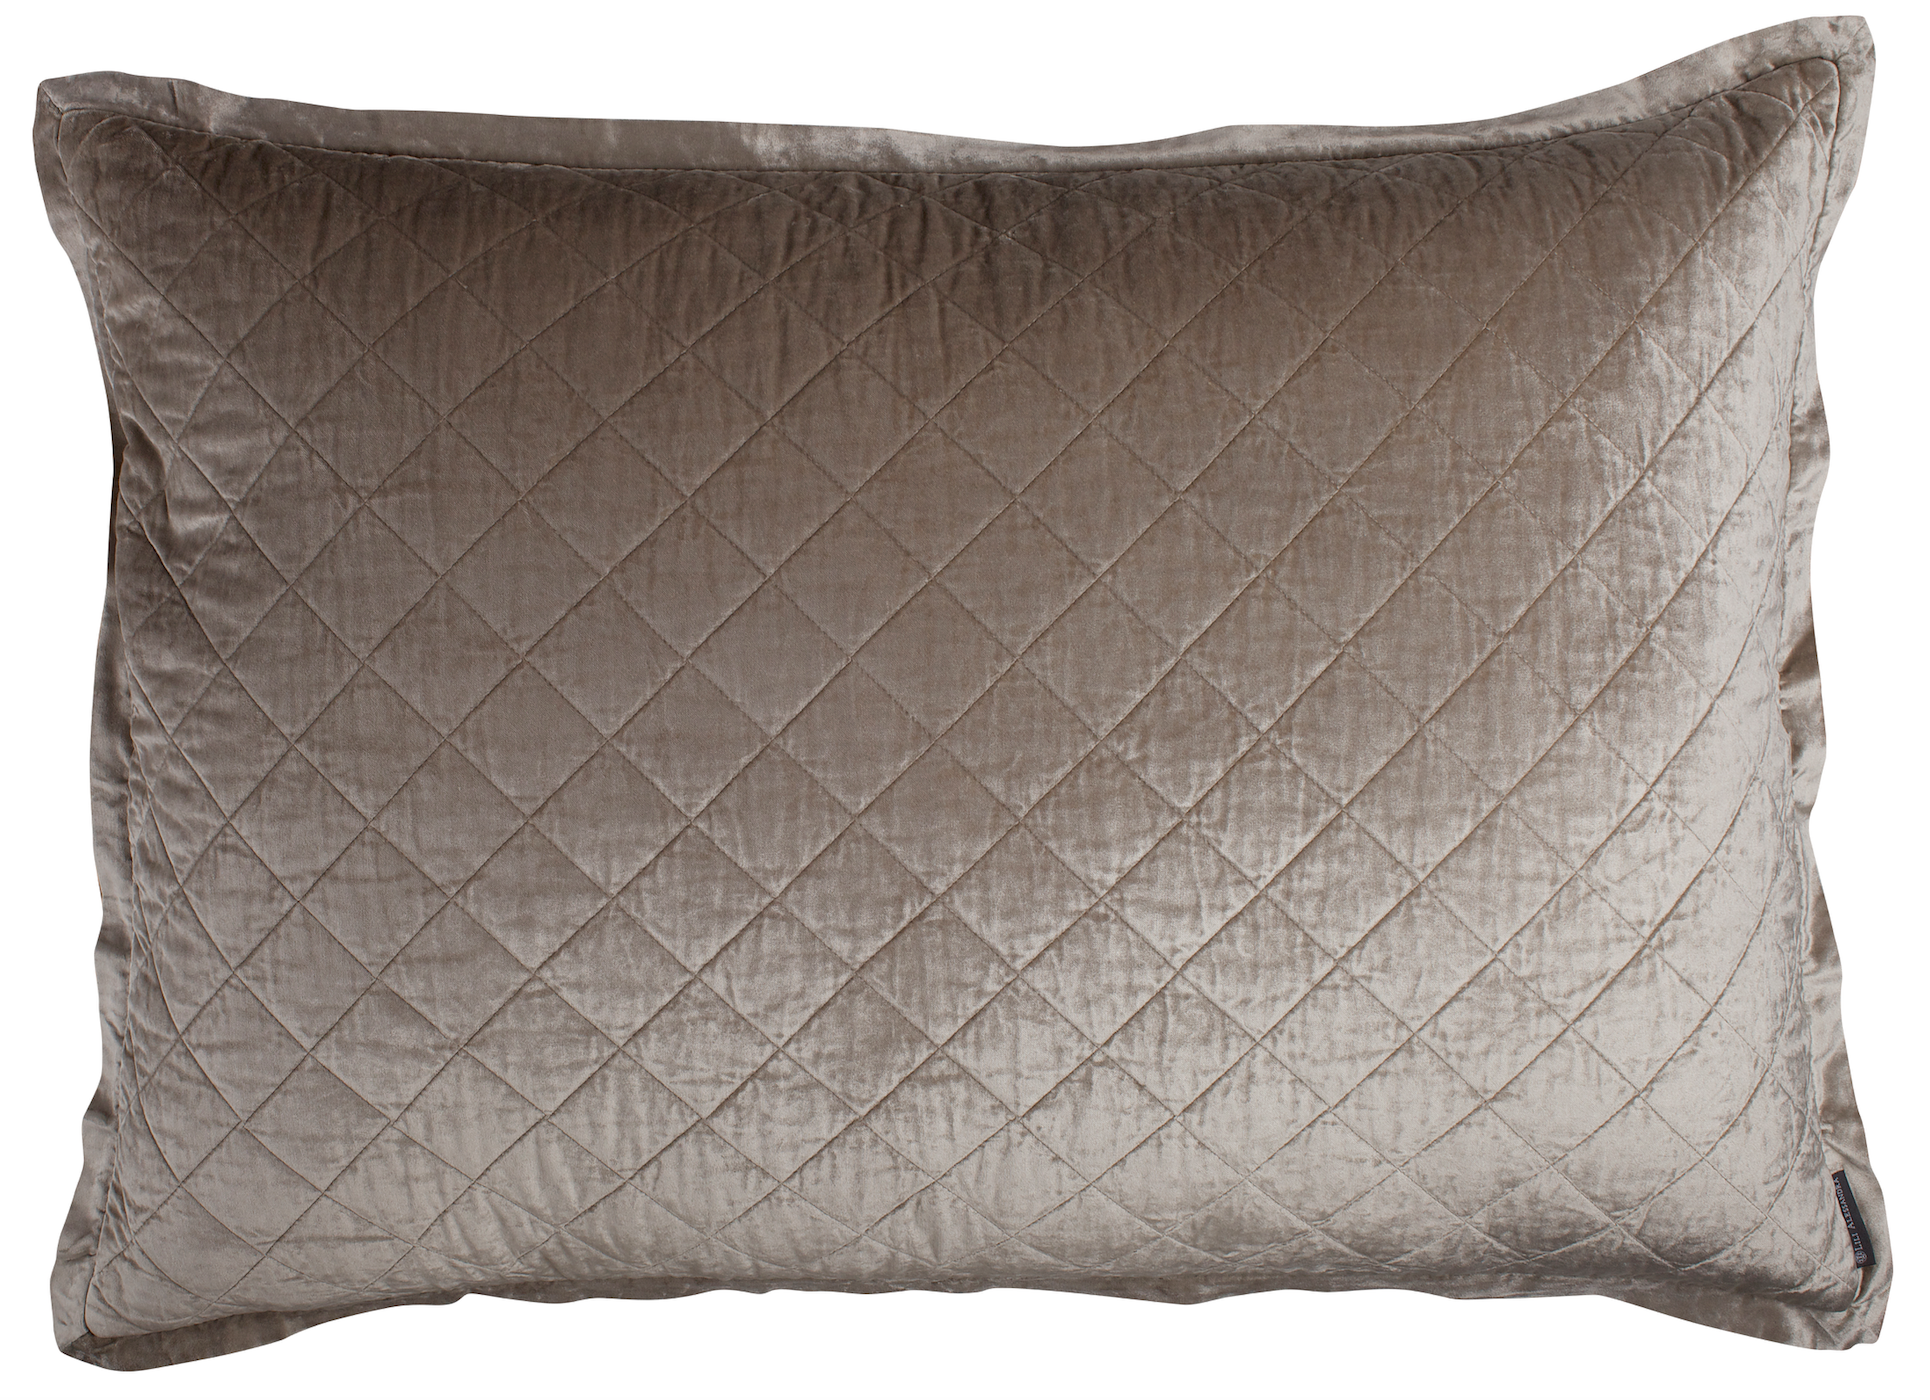 Chloe Fawn Velvet Luxe Euro Pillow by Lili Alessandra